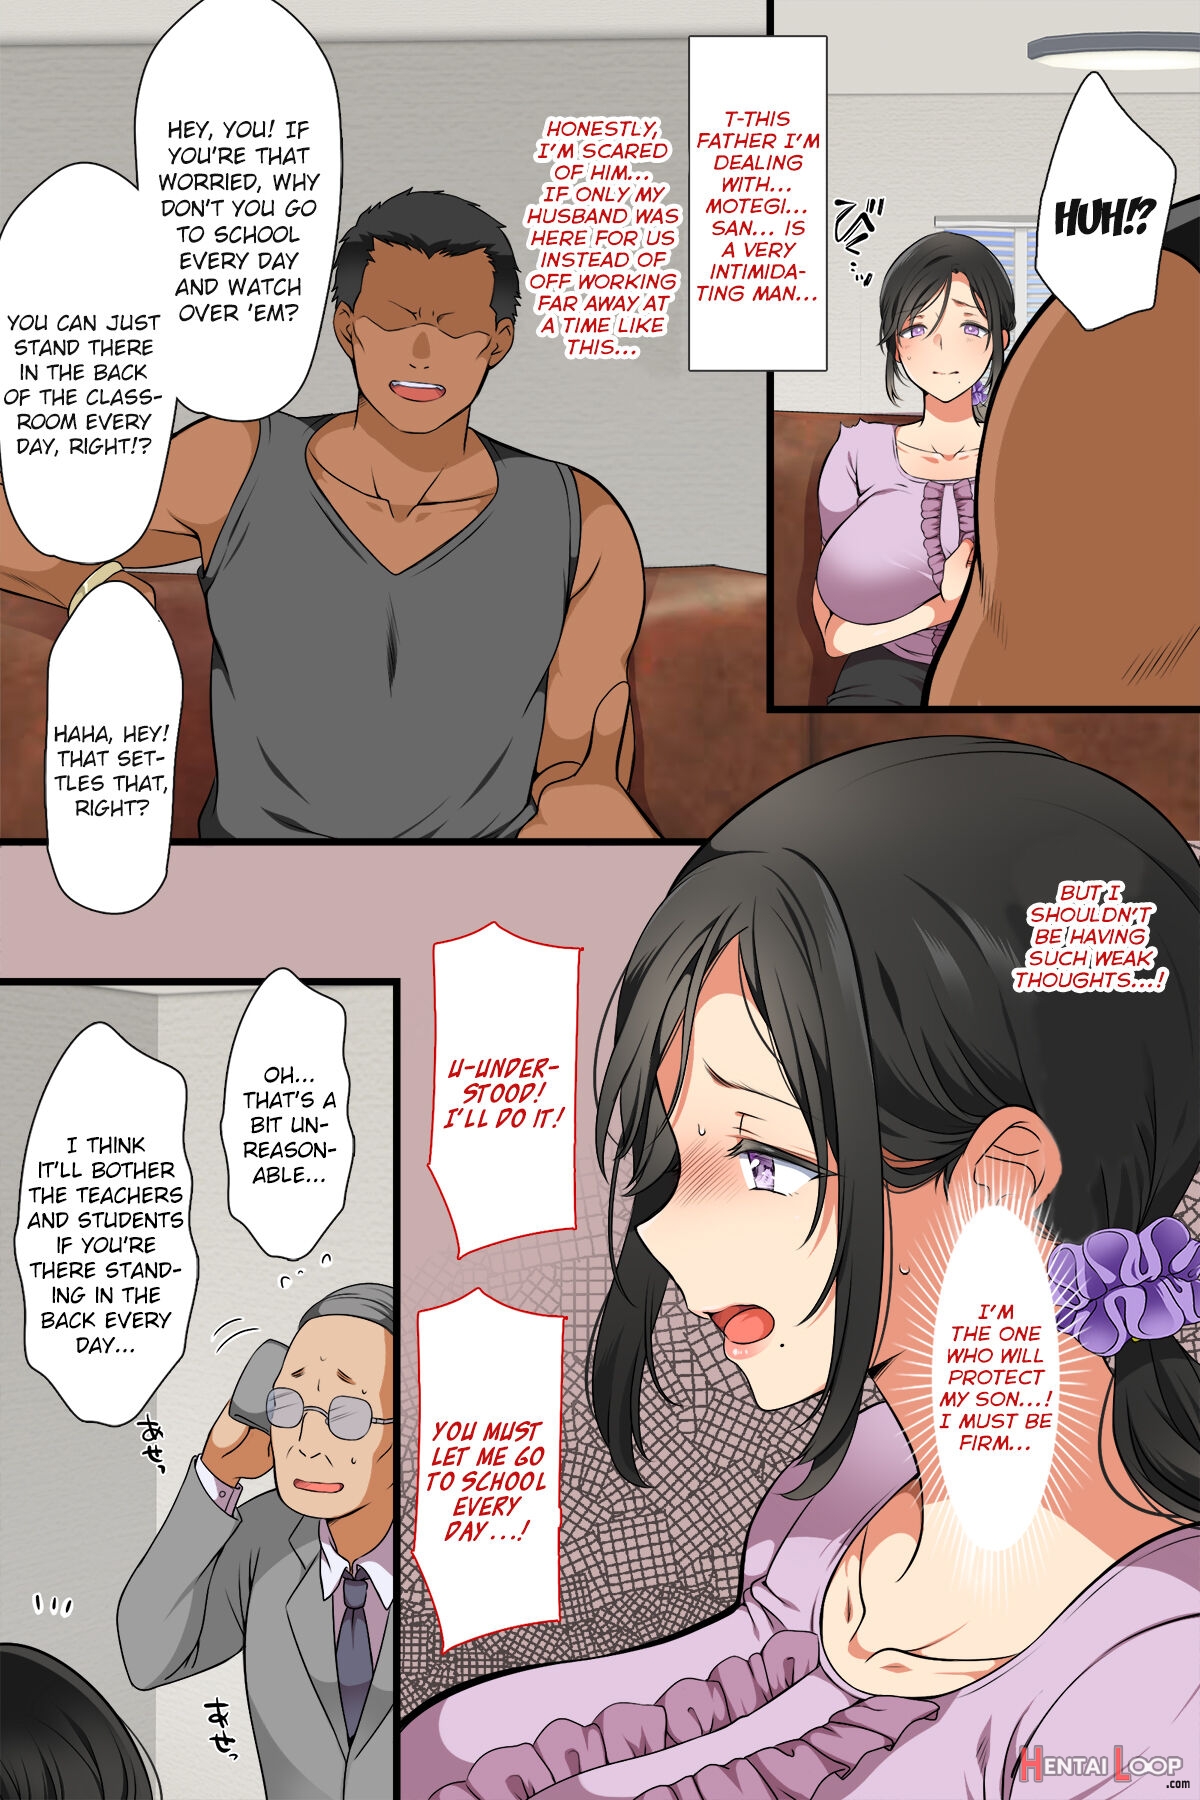 Page 4 of A Milf Became A Classmate! (by Koto) - Hentai doujinshi for free  at HentaiLoop